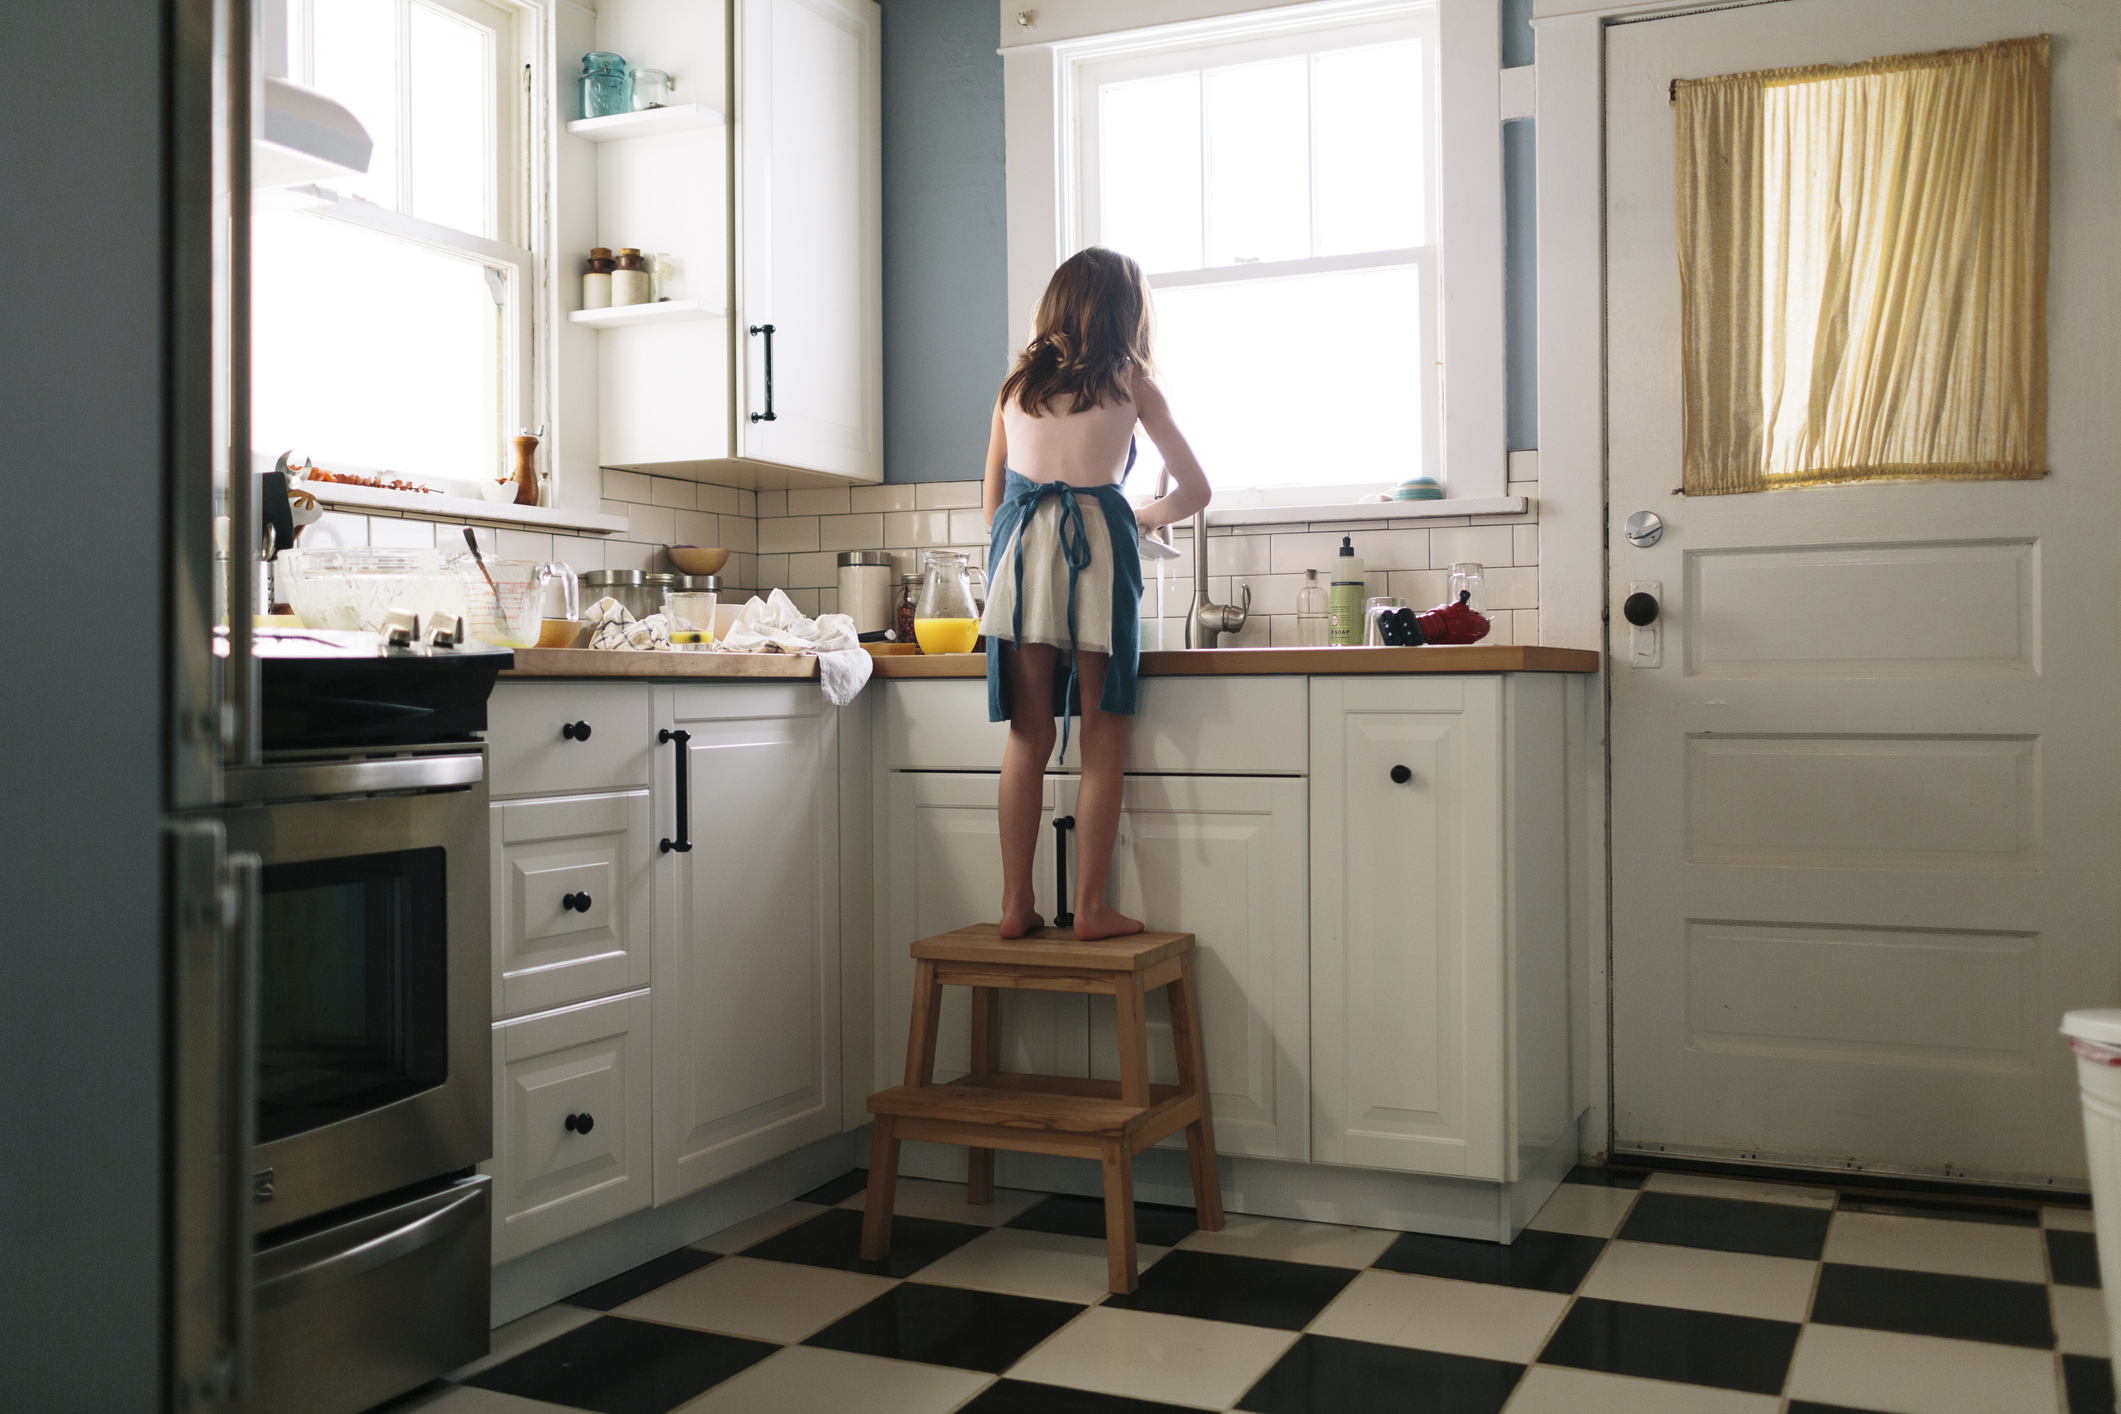 A child stands on a wooden stool at a kitchen counter, reaching towards a window. The kitchen has white cabinets and a checkered floor